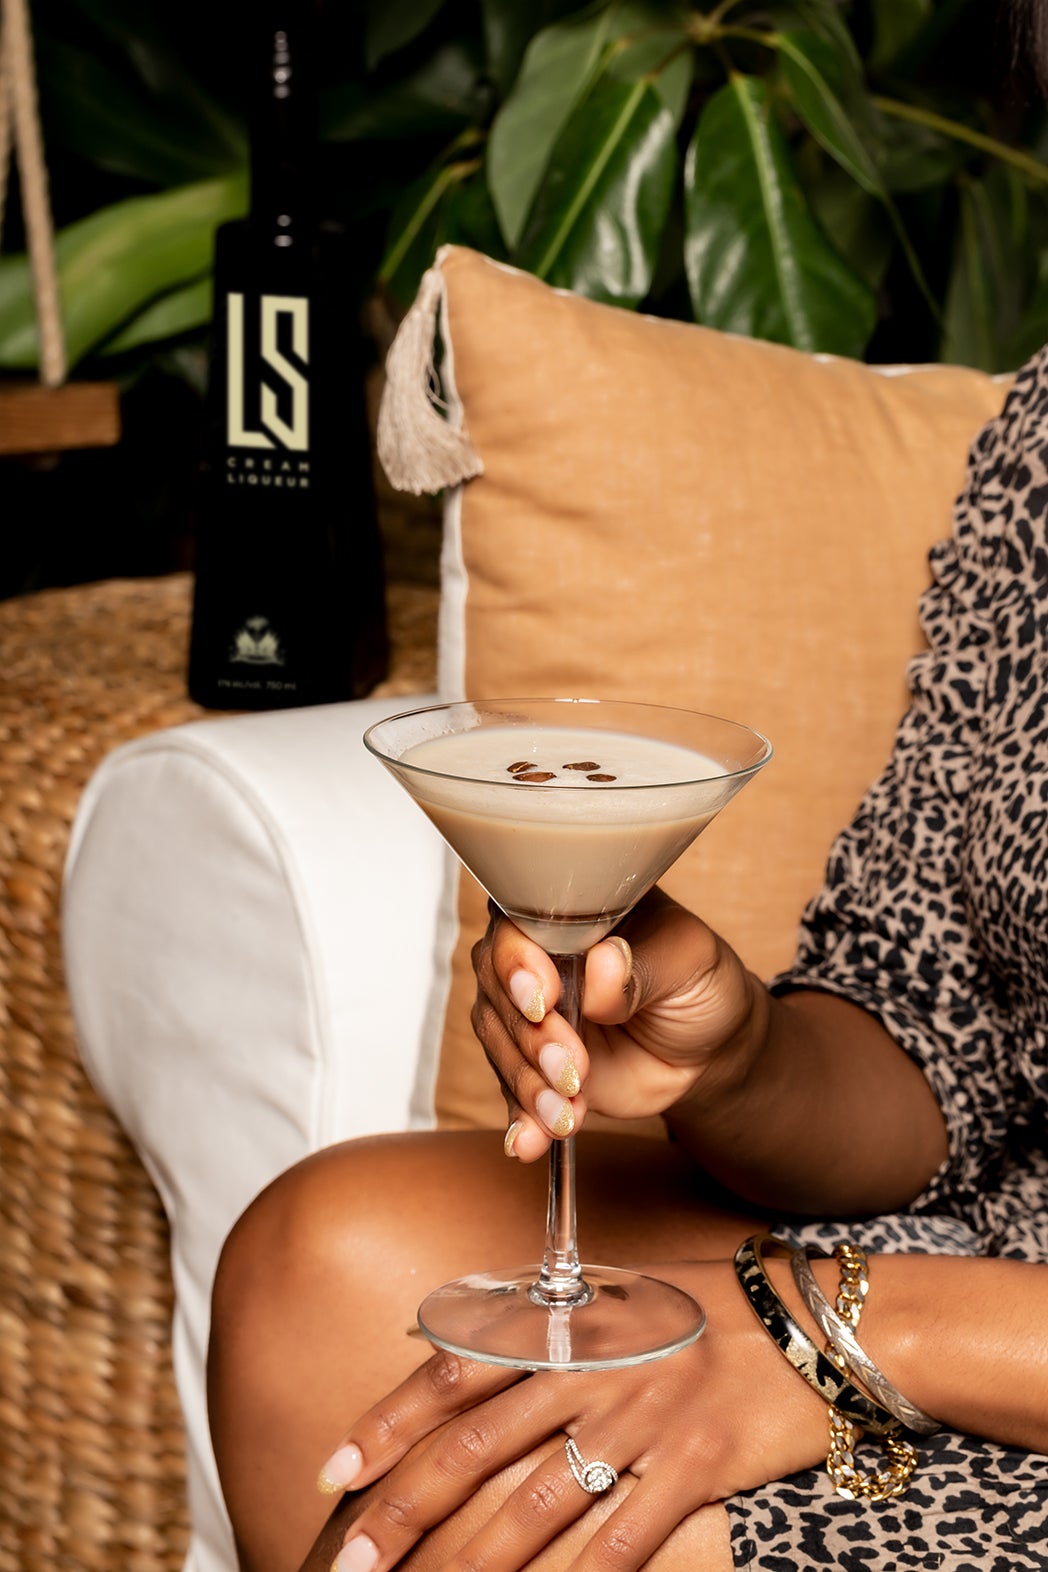 5 Festive Ways To Make A Haitian Cremas-Inspired Cocktail This Holiday From LS Cream Liqueur's Myriam Jean-Baptiste